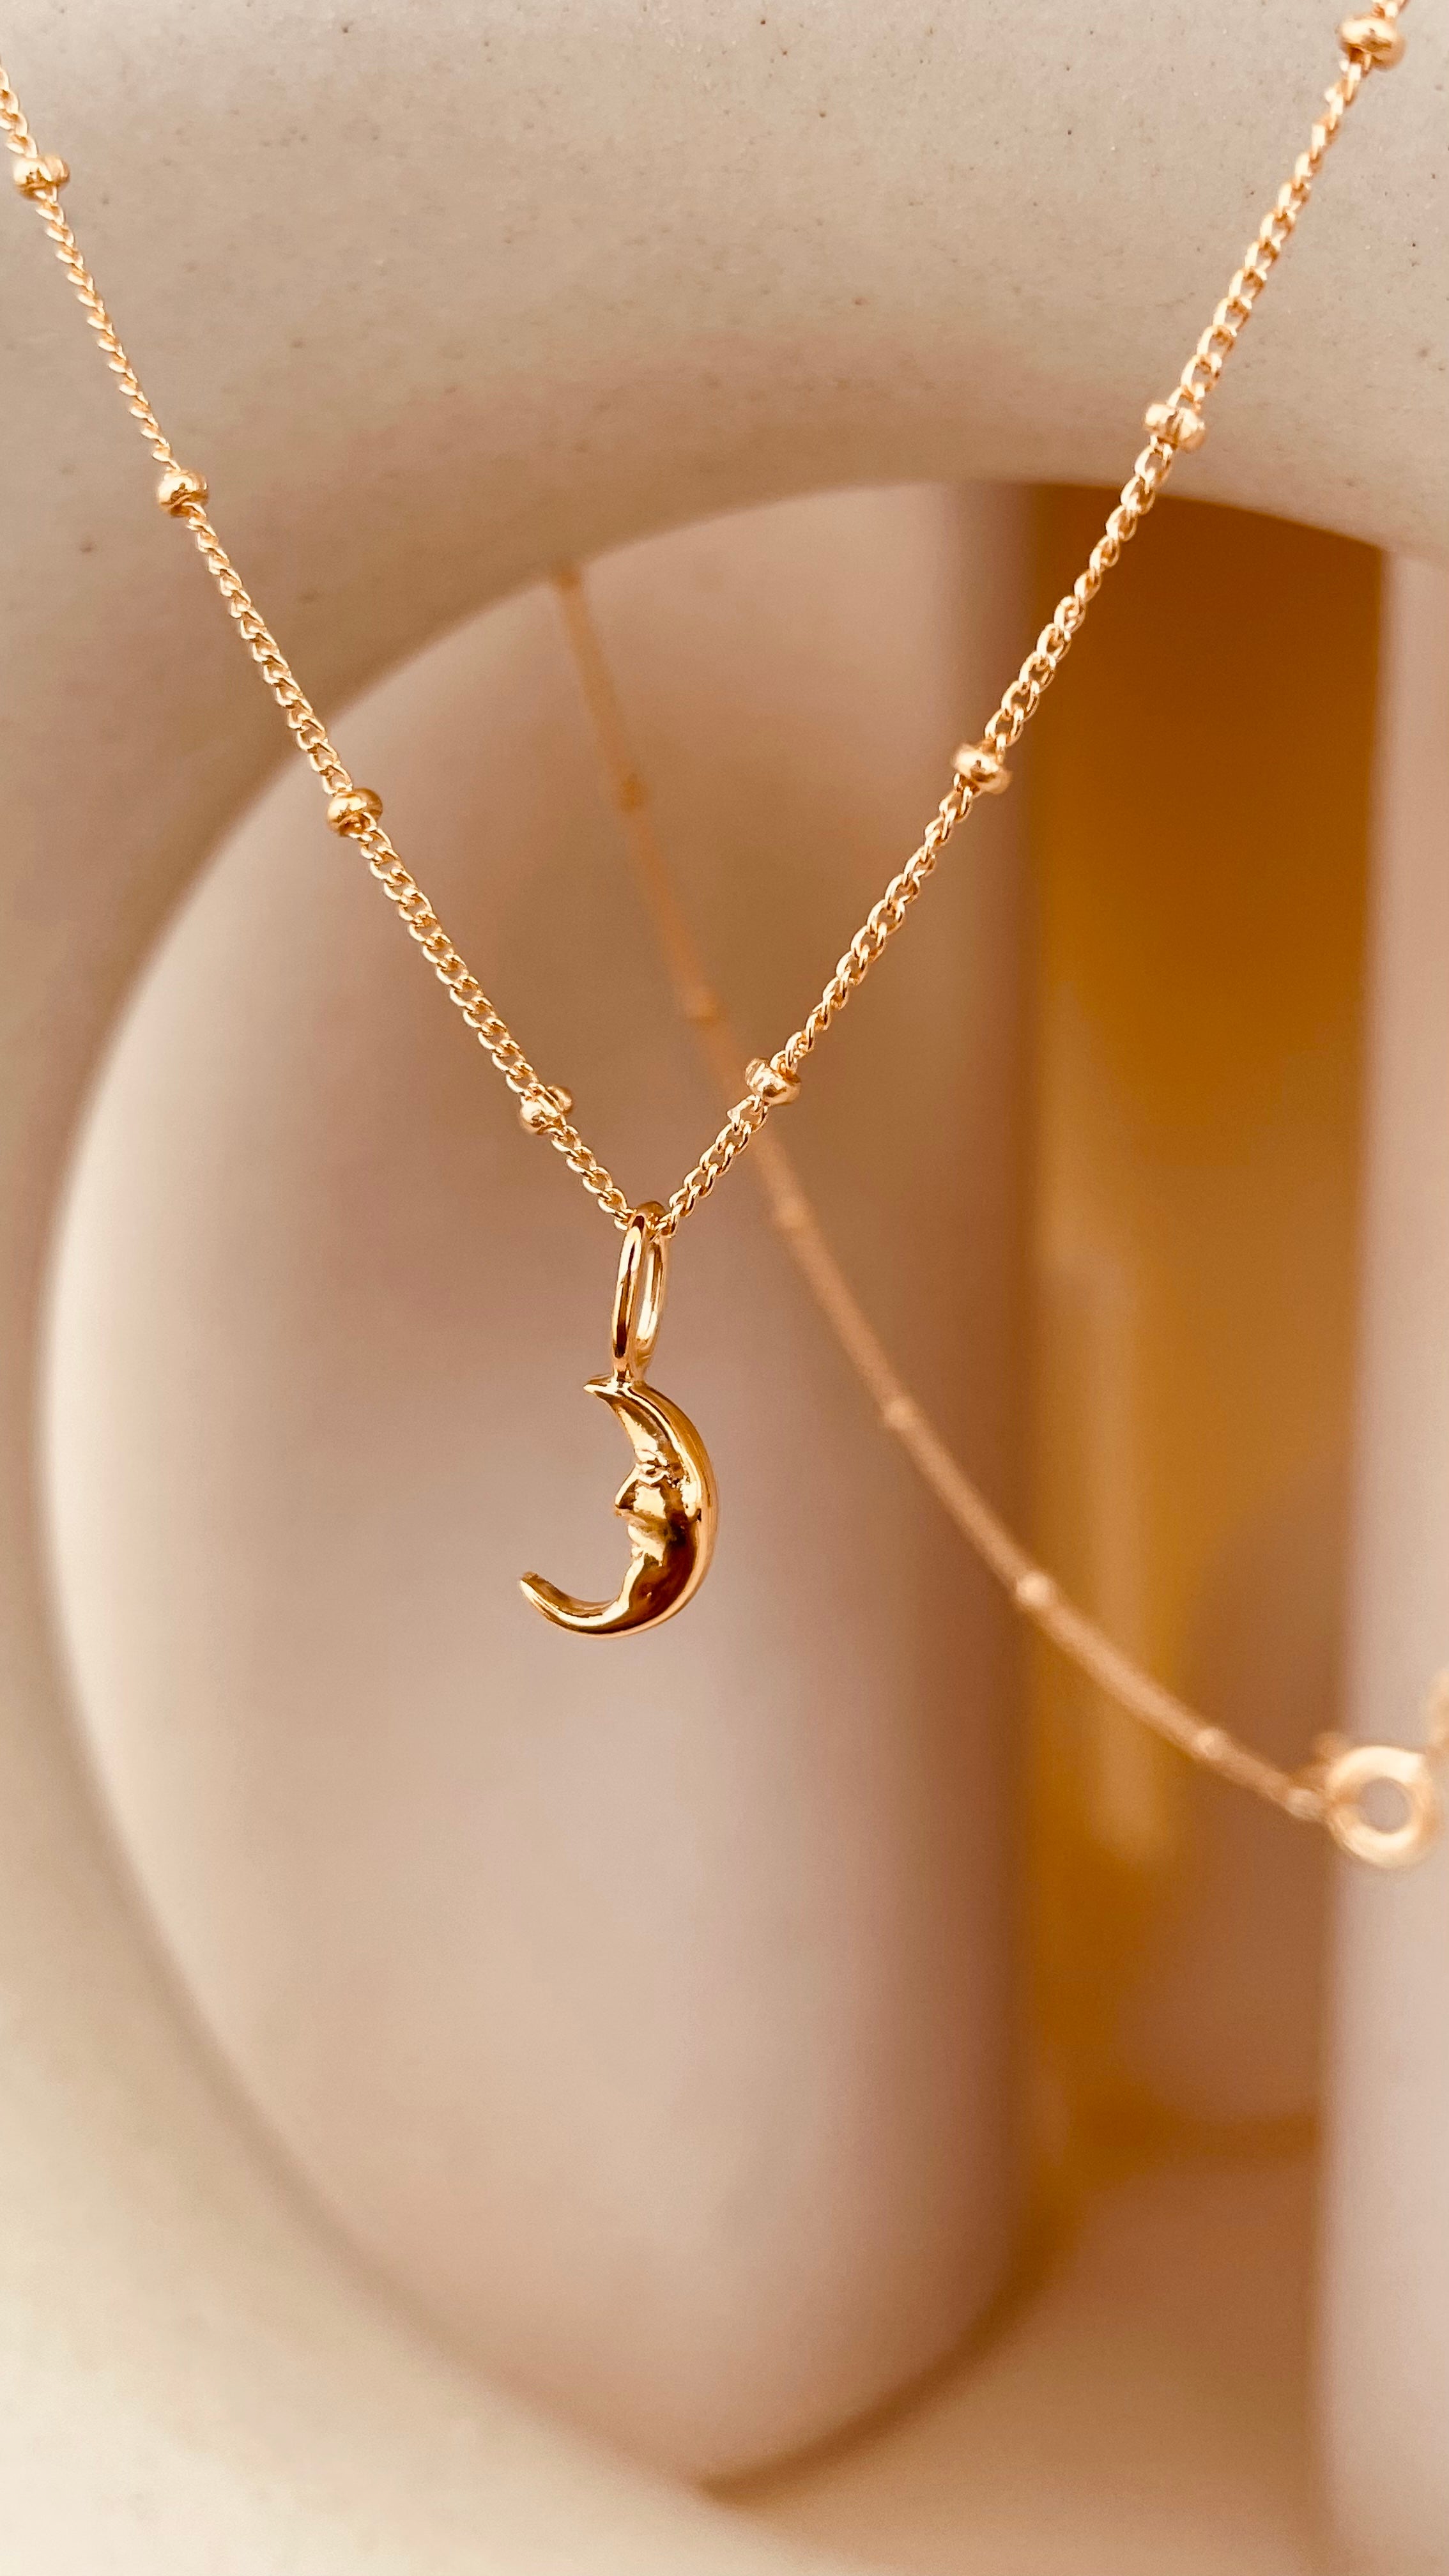 Crescent Moon Necklace with Satellite Chain - Octonov 